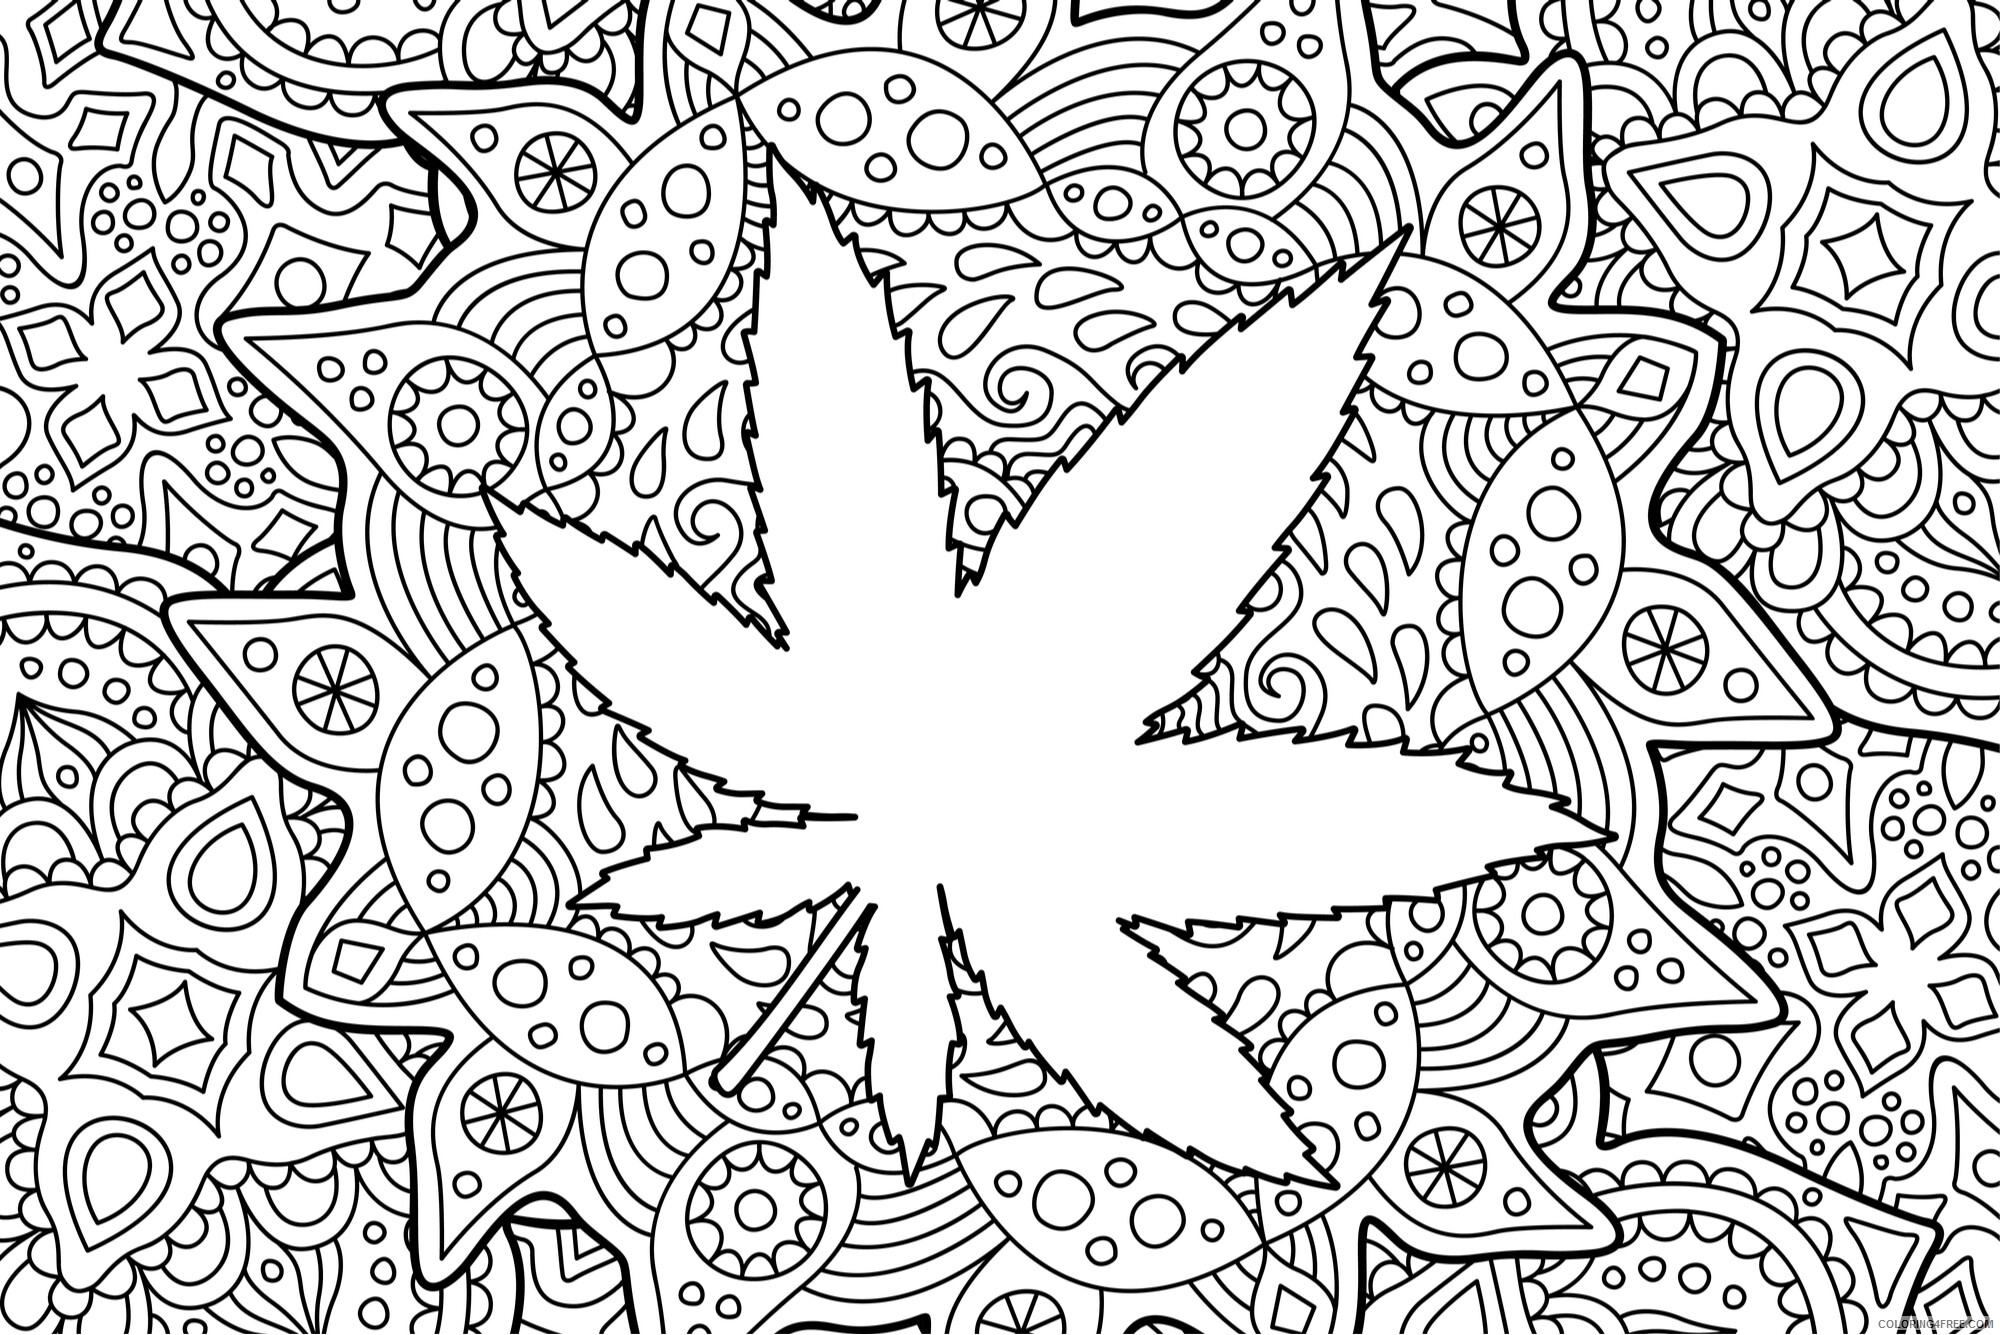 420 Coloring Pages Printable Sheets Top 5 Cannabis Books 2021 09 683 Coloring4free